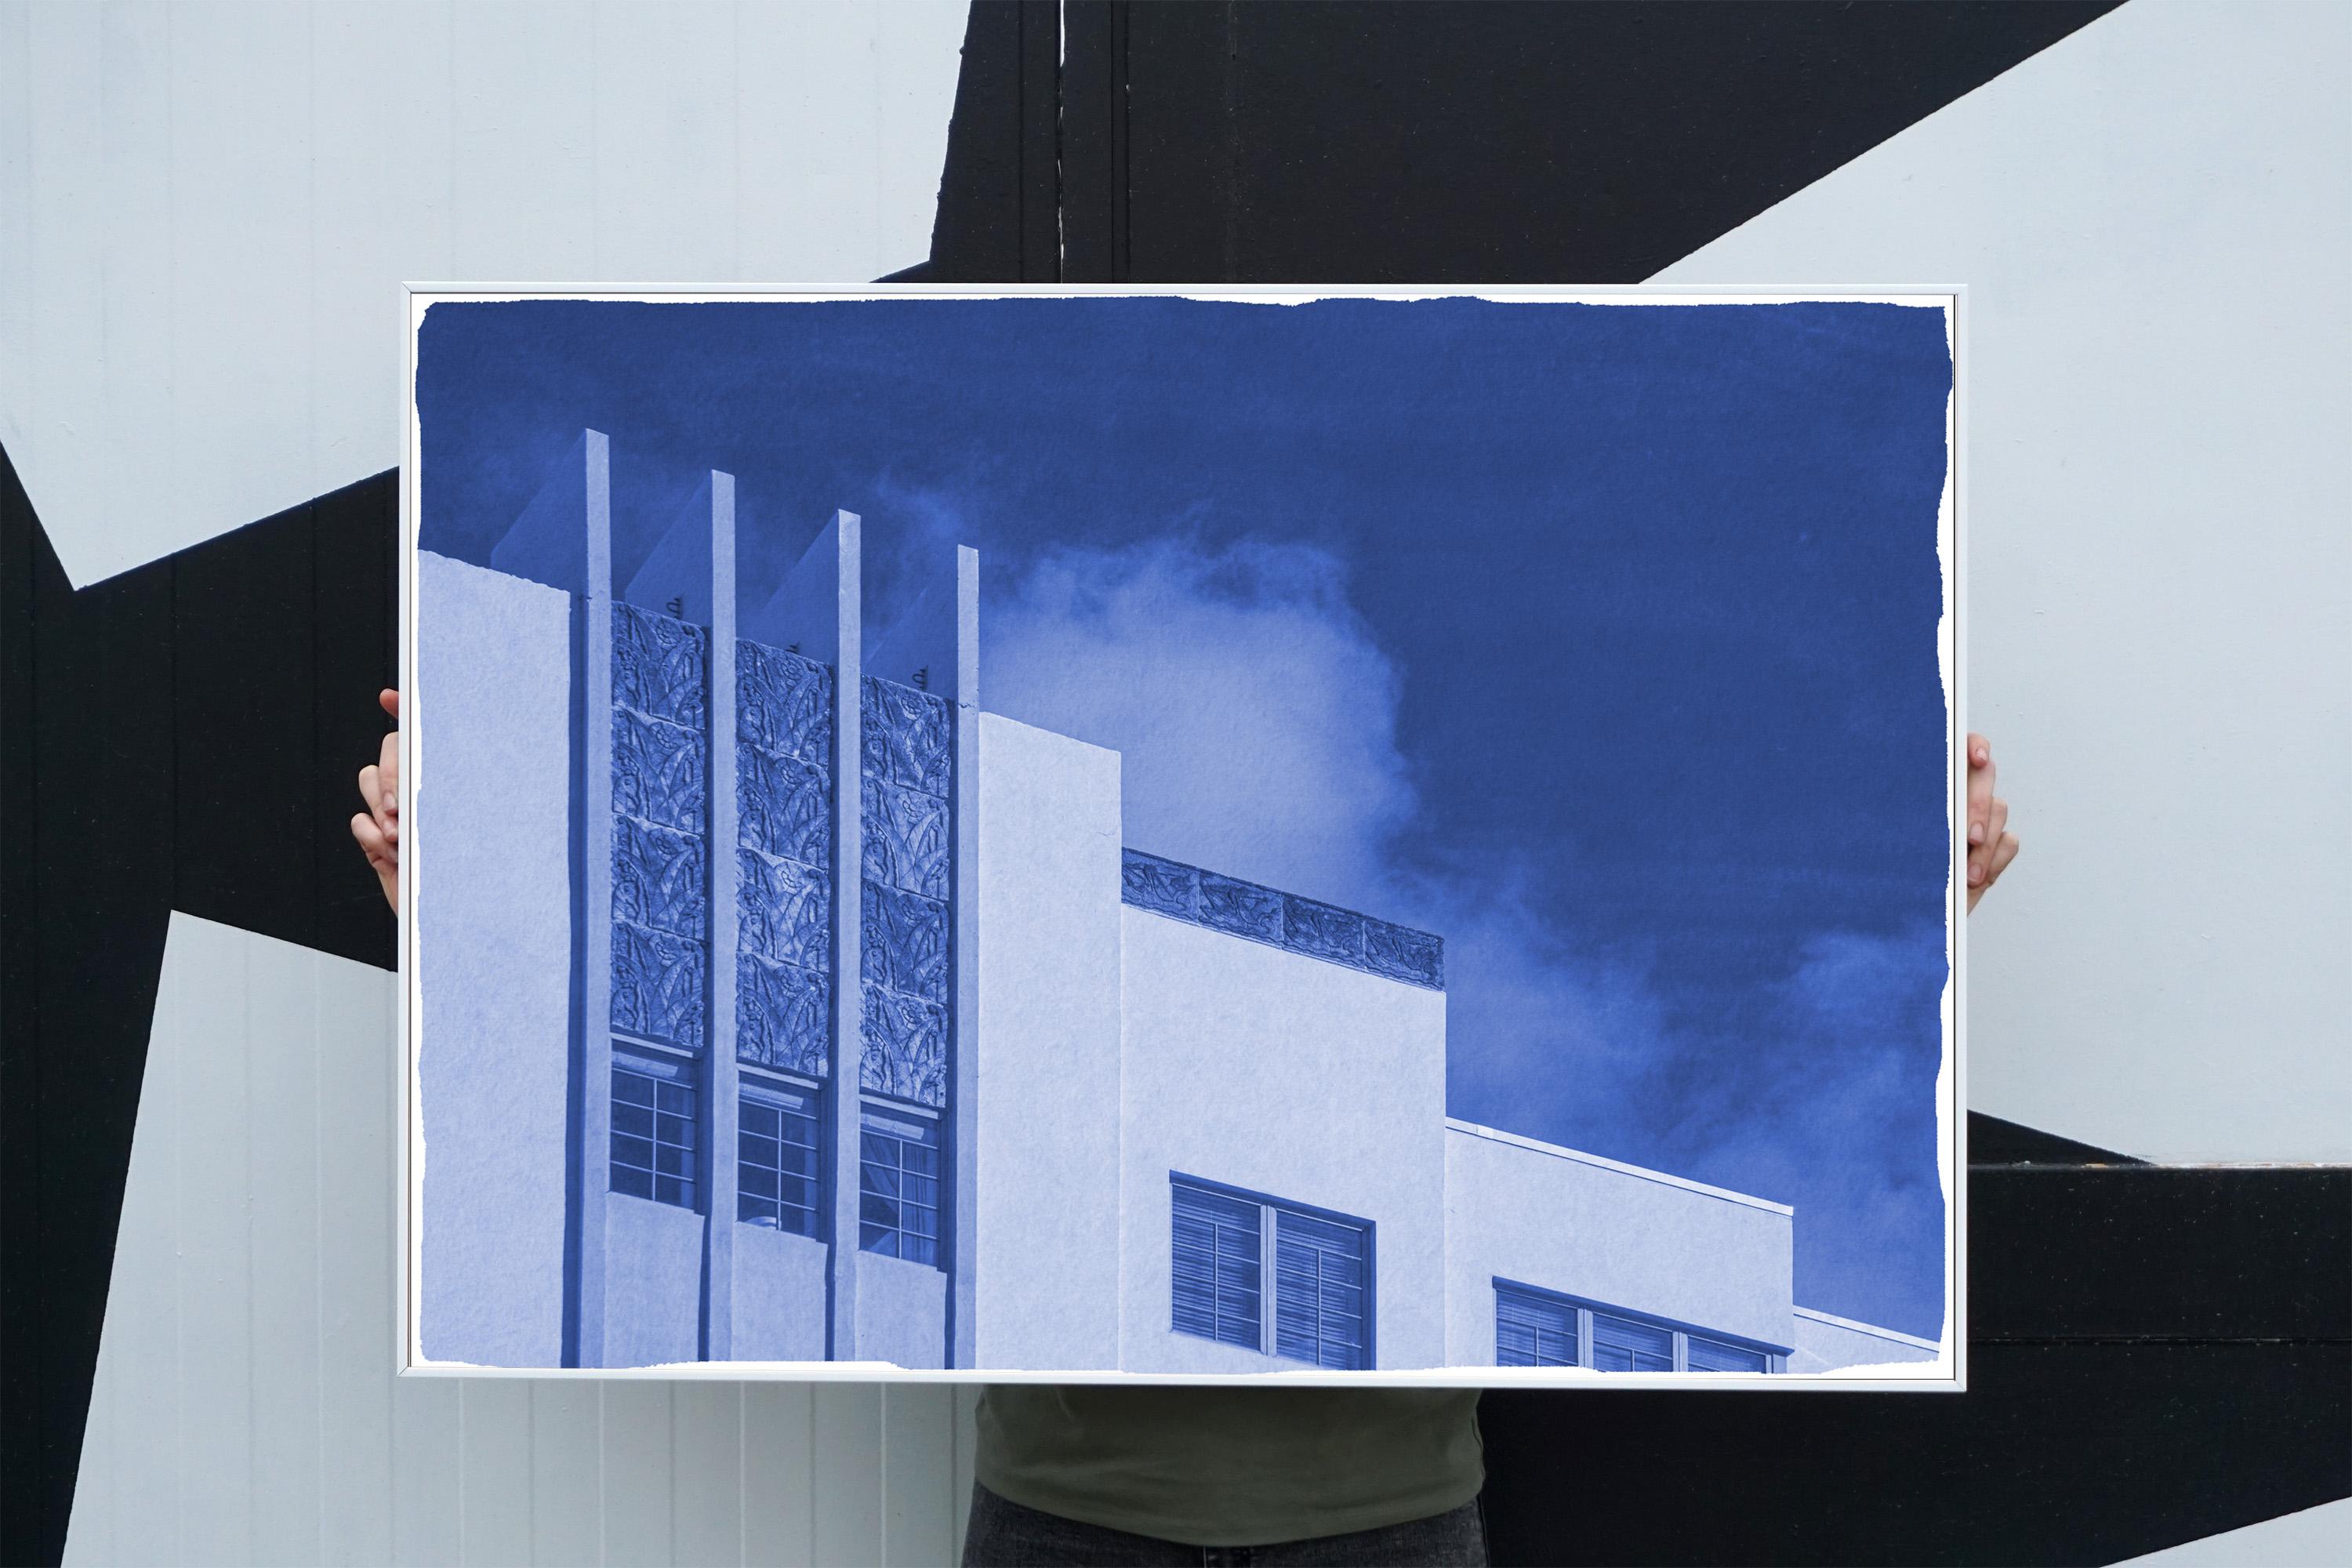 Thirties Building with Sky, Handmade Cyanotype Print in Blue Tones, Miami Style For Sale 2